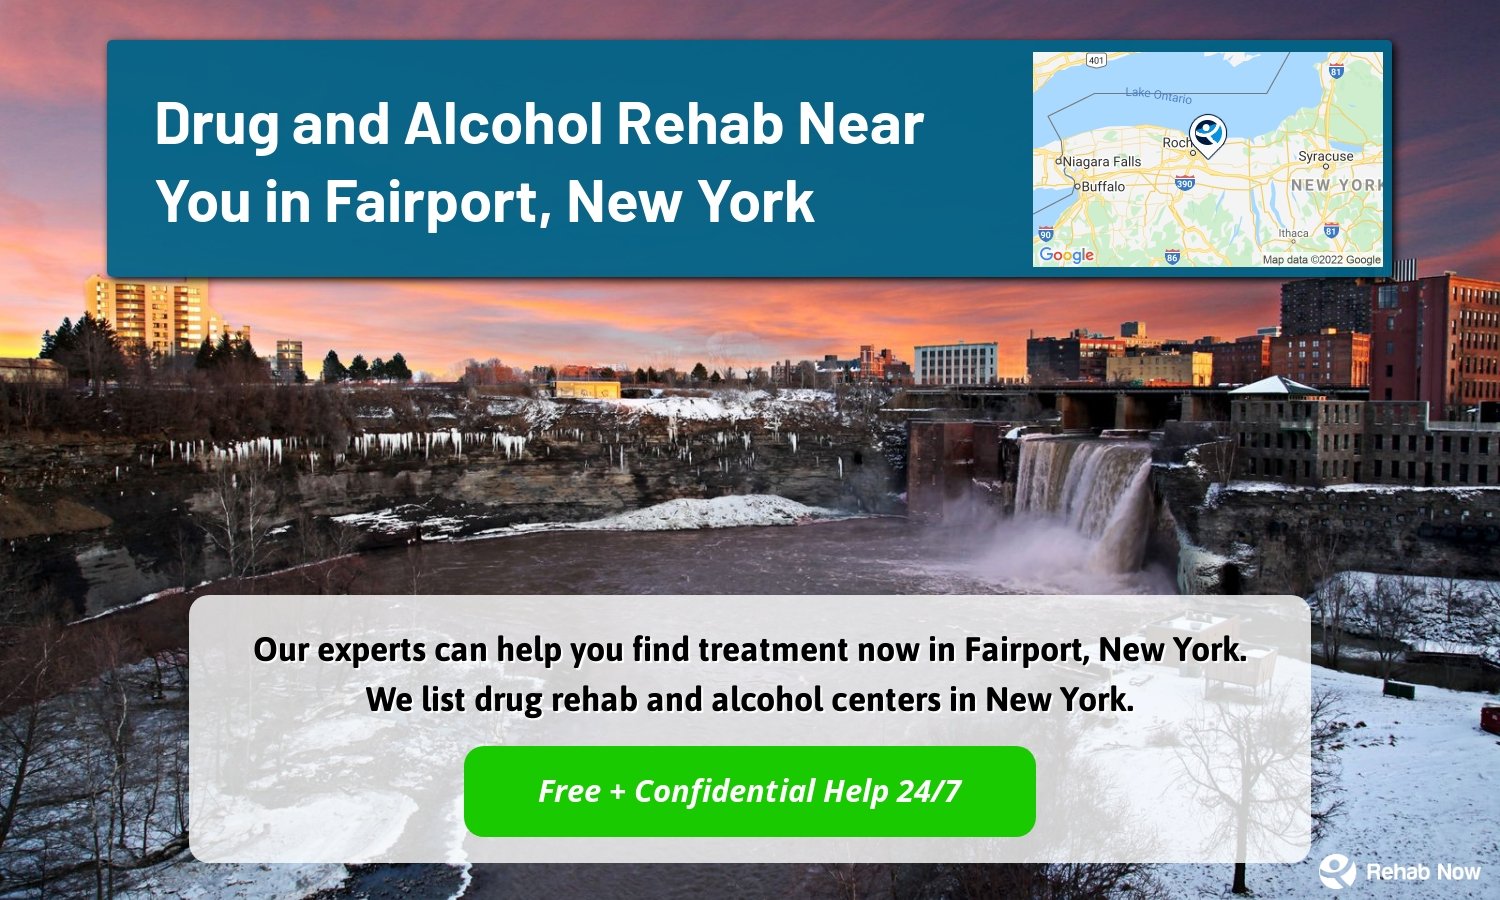 Our experts can help you find treatment now in Fairport, New York. We list drug rehab and alcohol centers in New York.